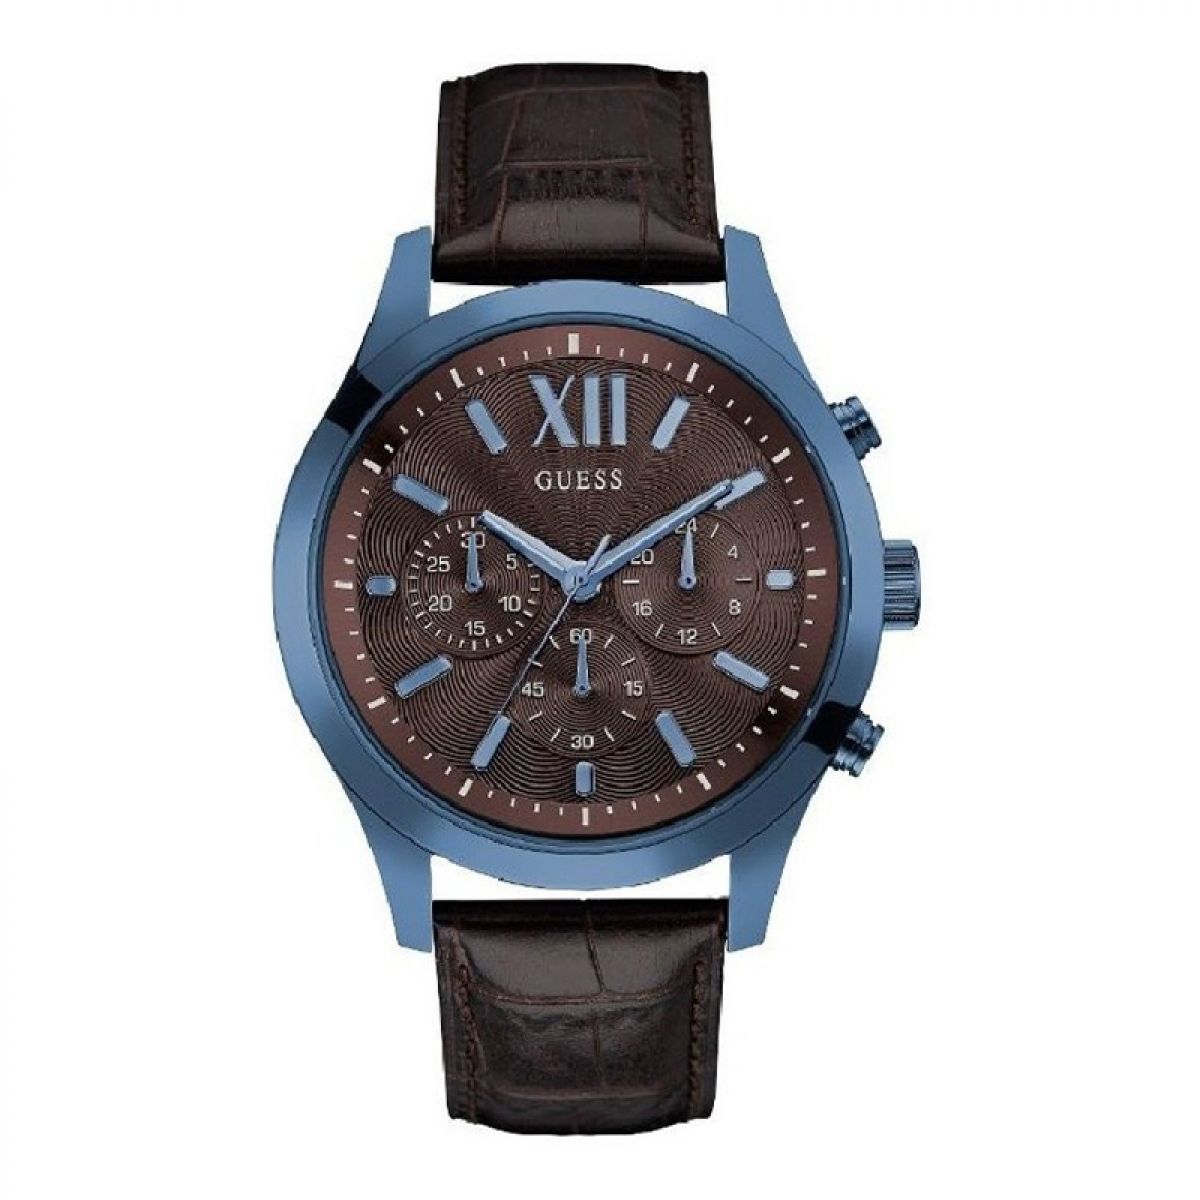 GUESS ELEVATION CHRONOGRAPH W0789G2